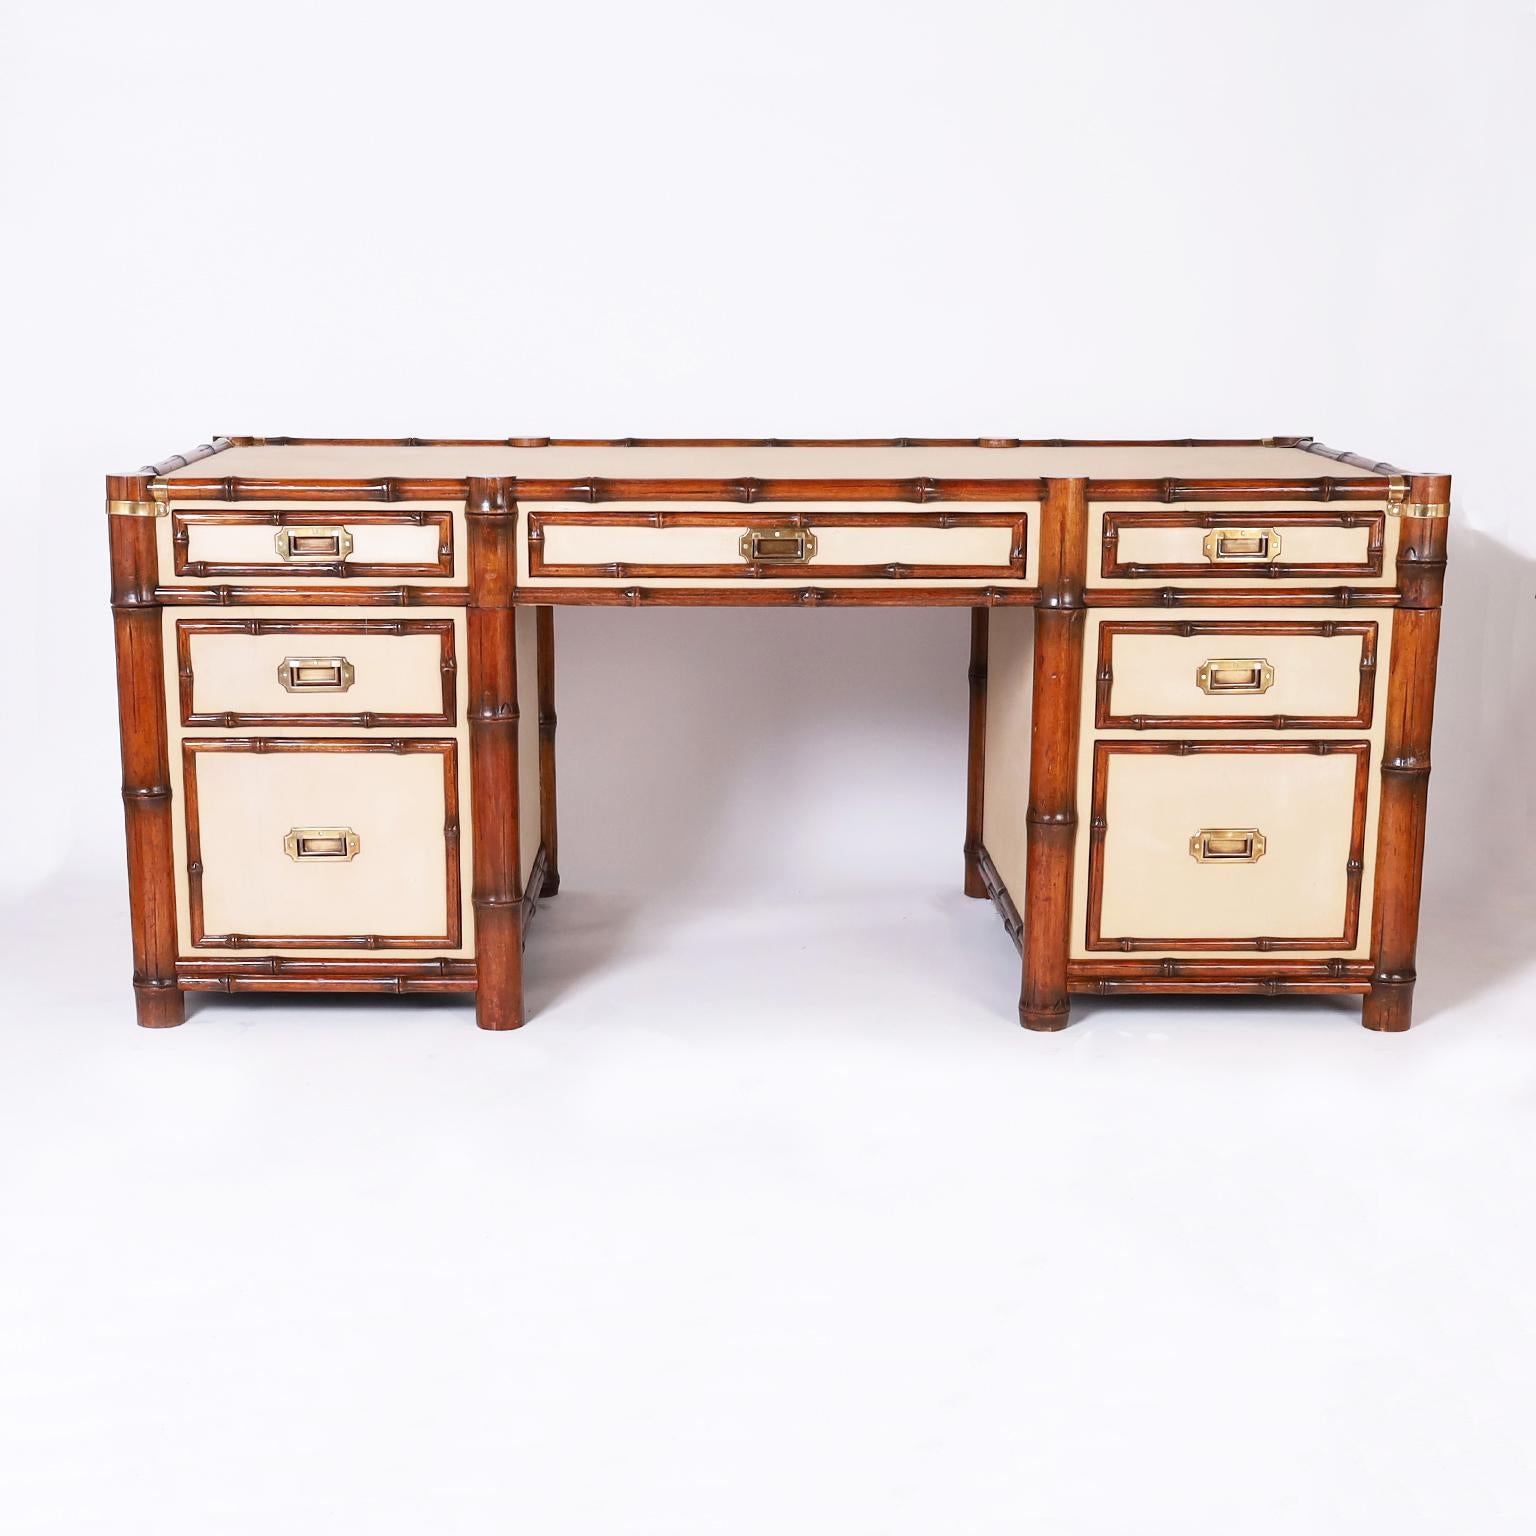 British colonial three piece seven drawer desk with a bamboo frame and panels of tan canvas on the top, sides, front, and back., attributed to Ralph Lauren.The drawer fronts are paneled with bamboo and have brass campaign style hardware. Can be used